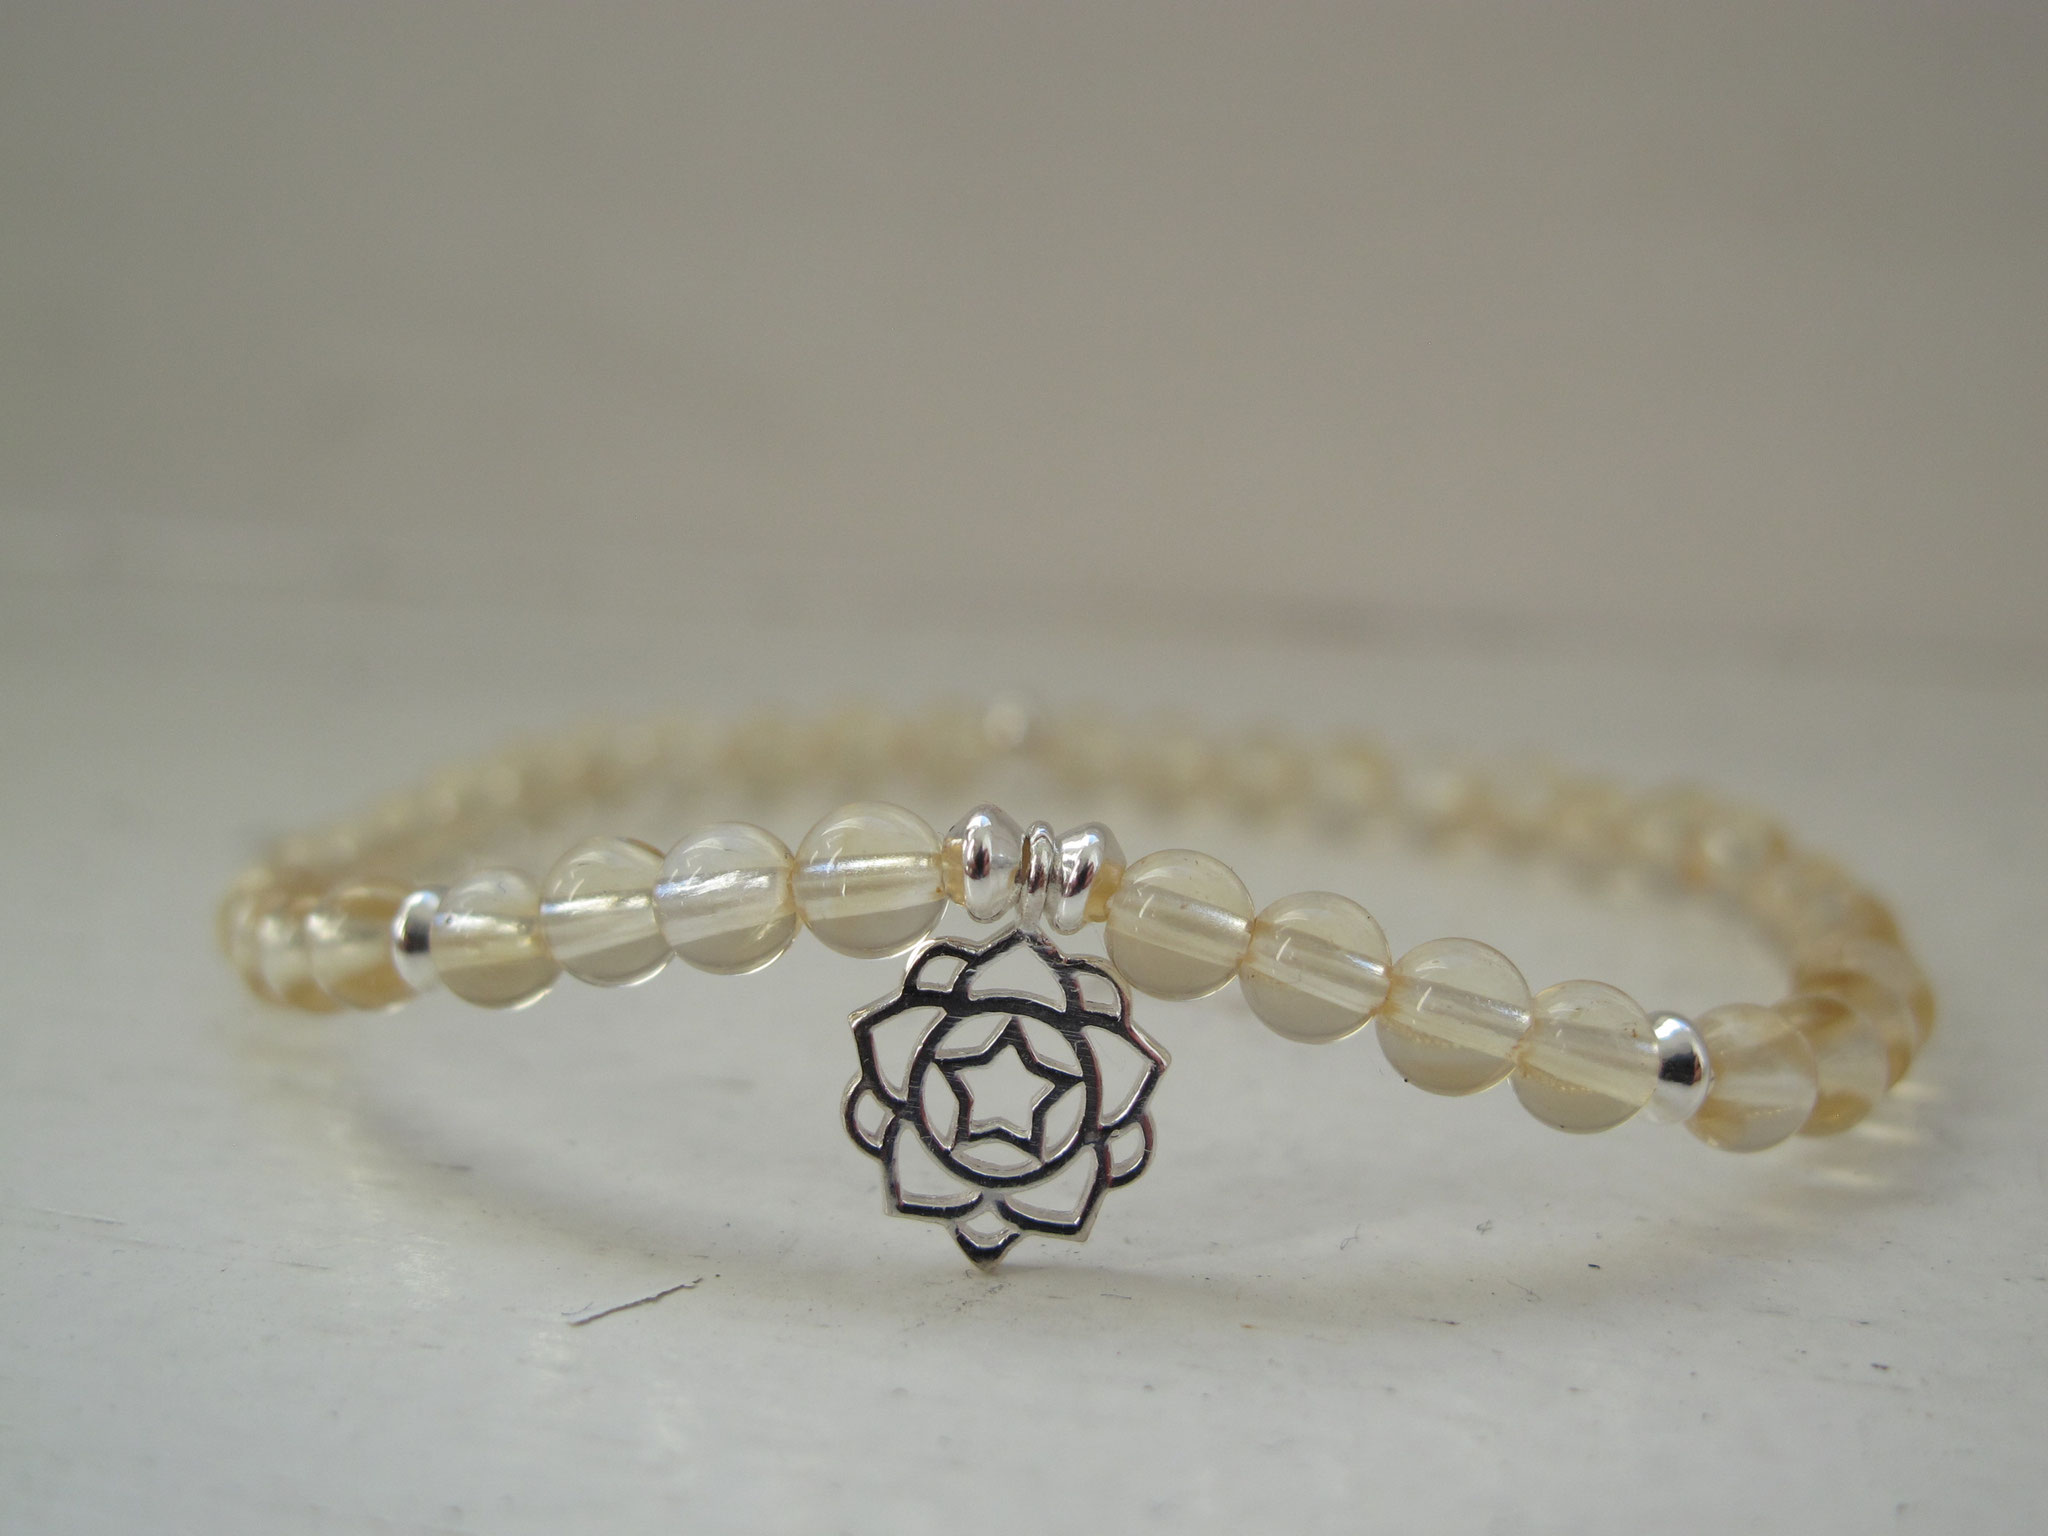 The Chakra collection: (3) Solar plexus chakra; the sweet and softly yellow citrine 